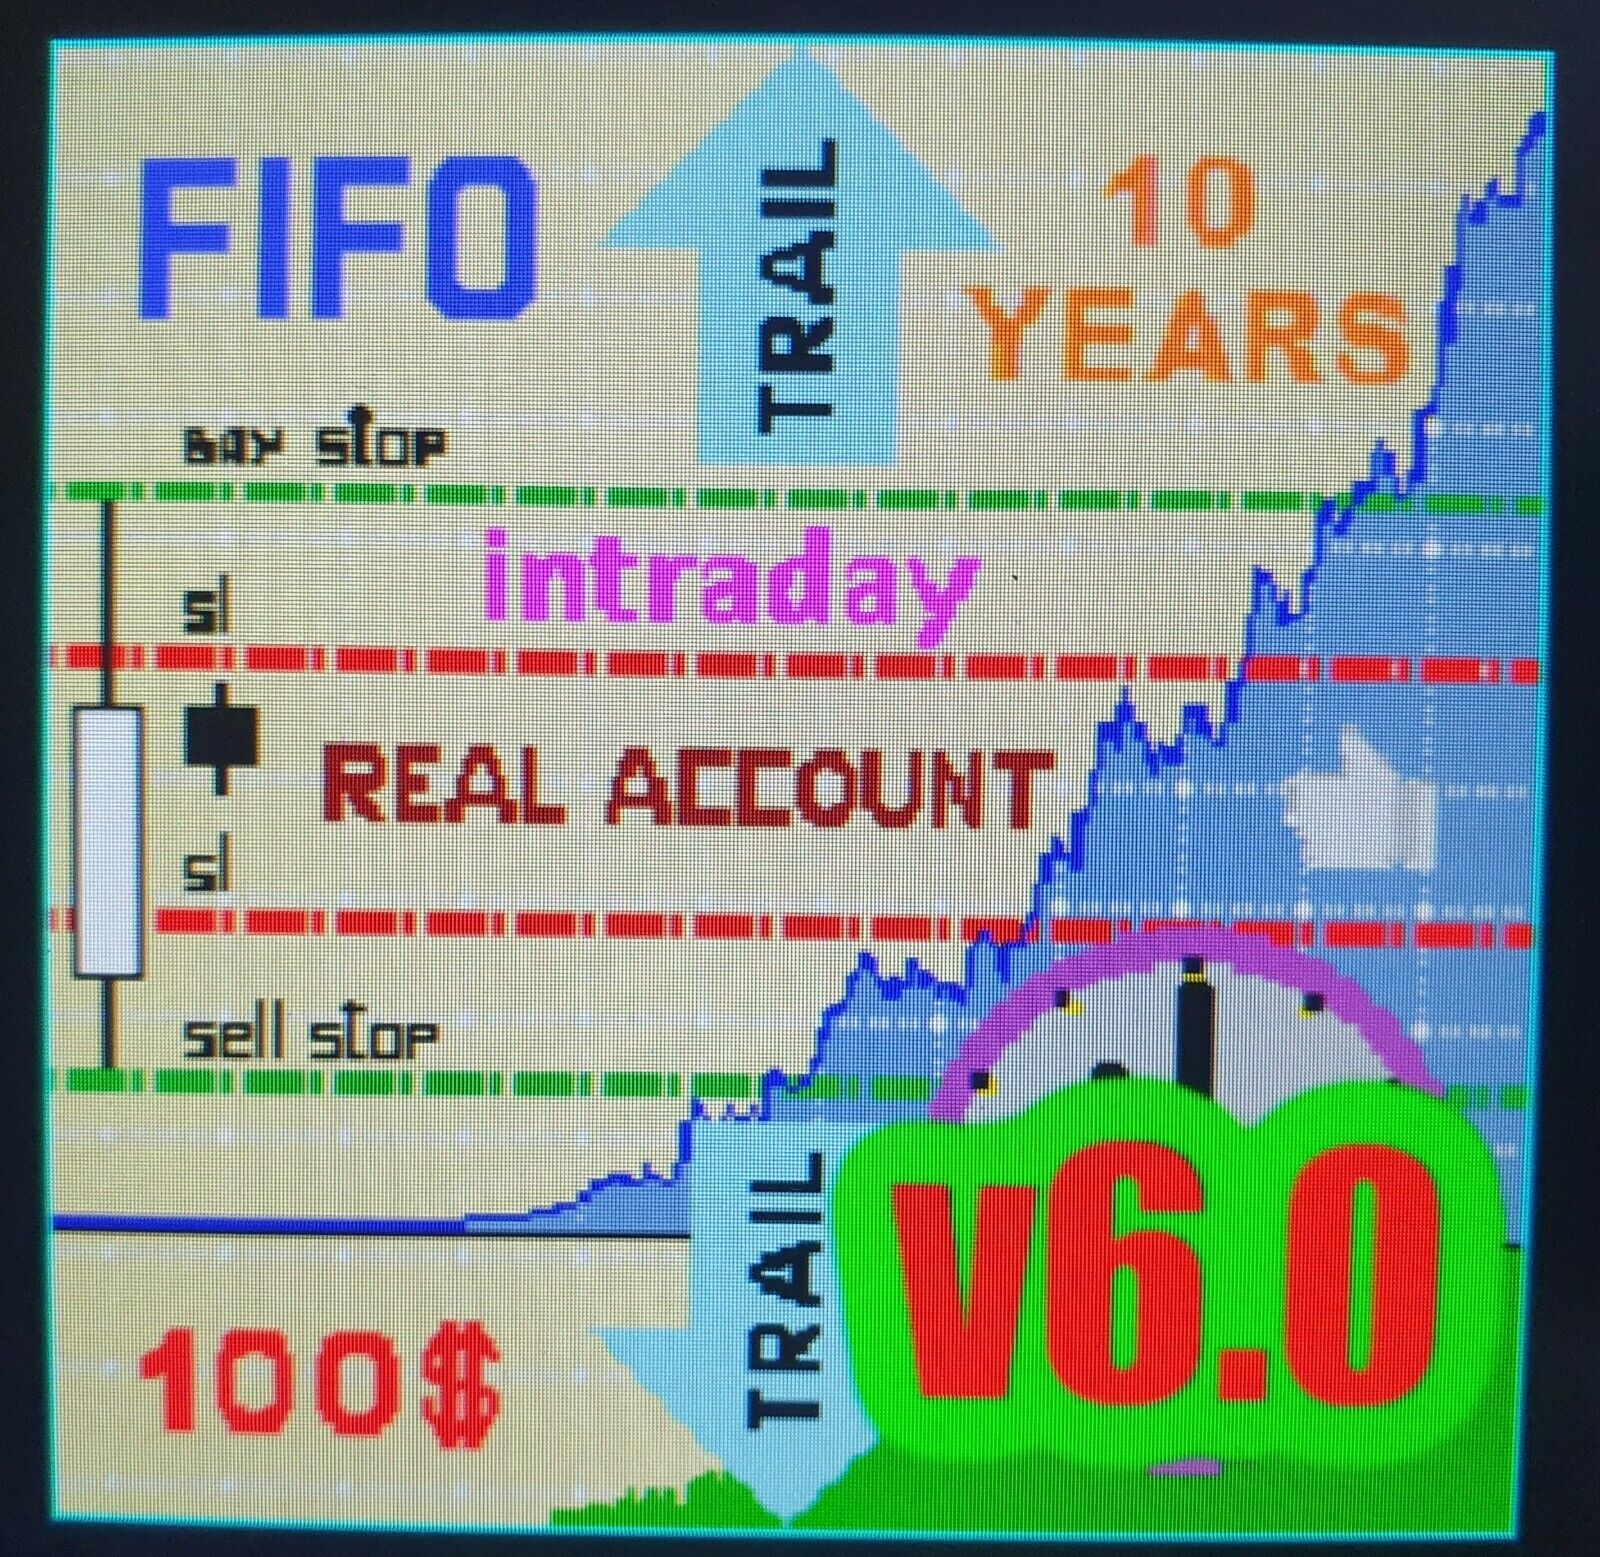 Prado EA v6.0 FX Robot This strategy is over 100 years old, and it always works!